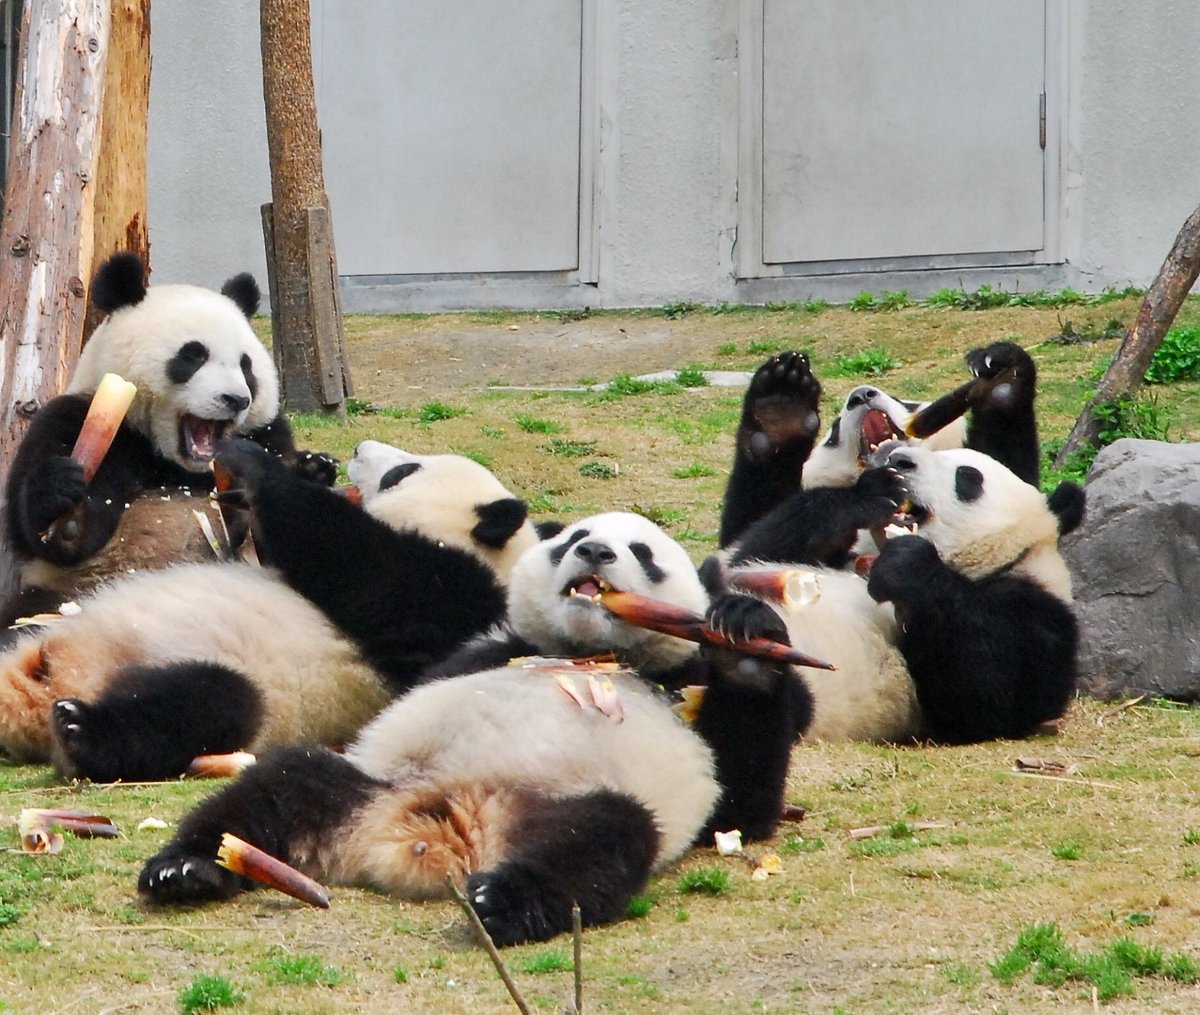 Want to meet a panda? Here's where you can find them besides China